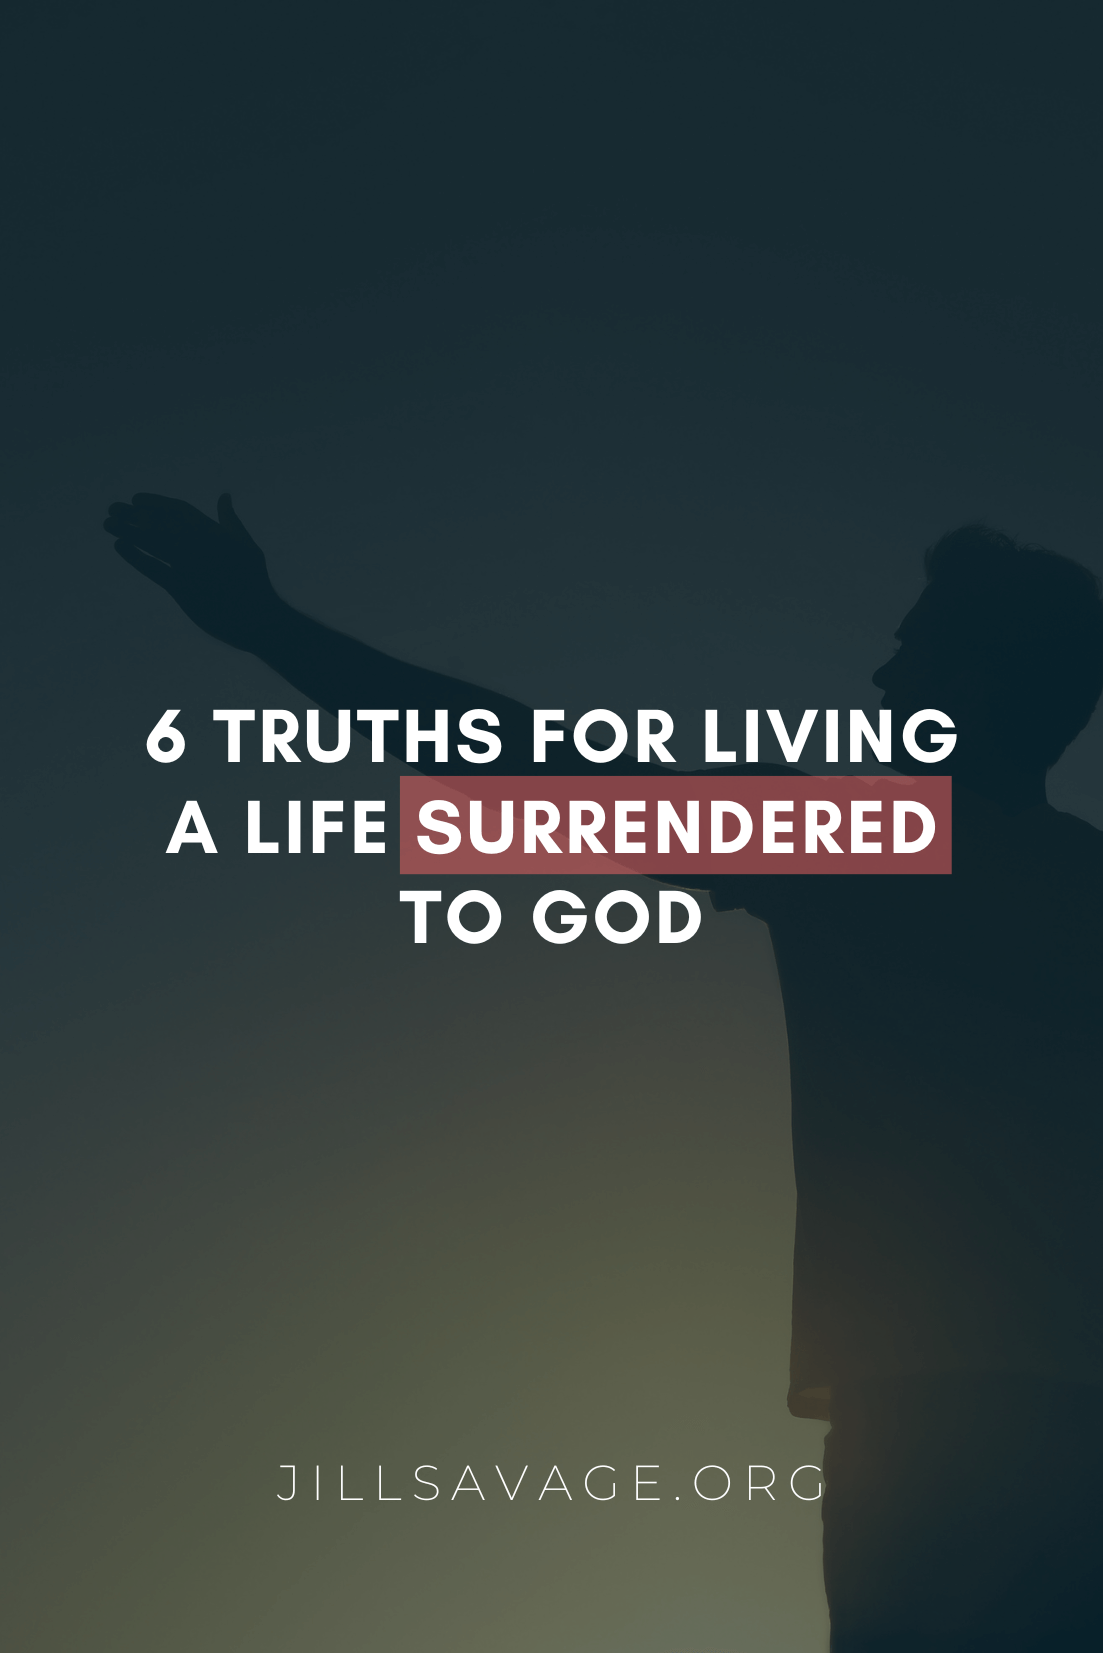 6 Truths for Living a Life Surrendered to God